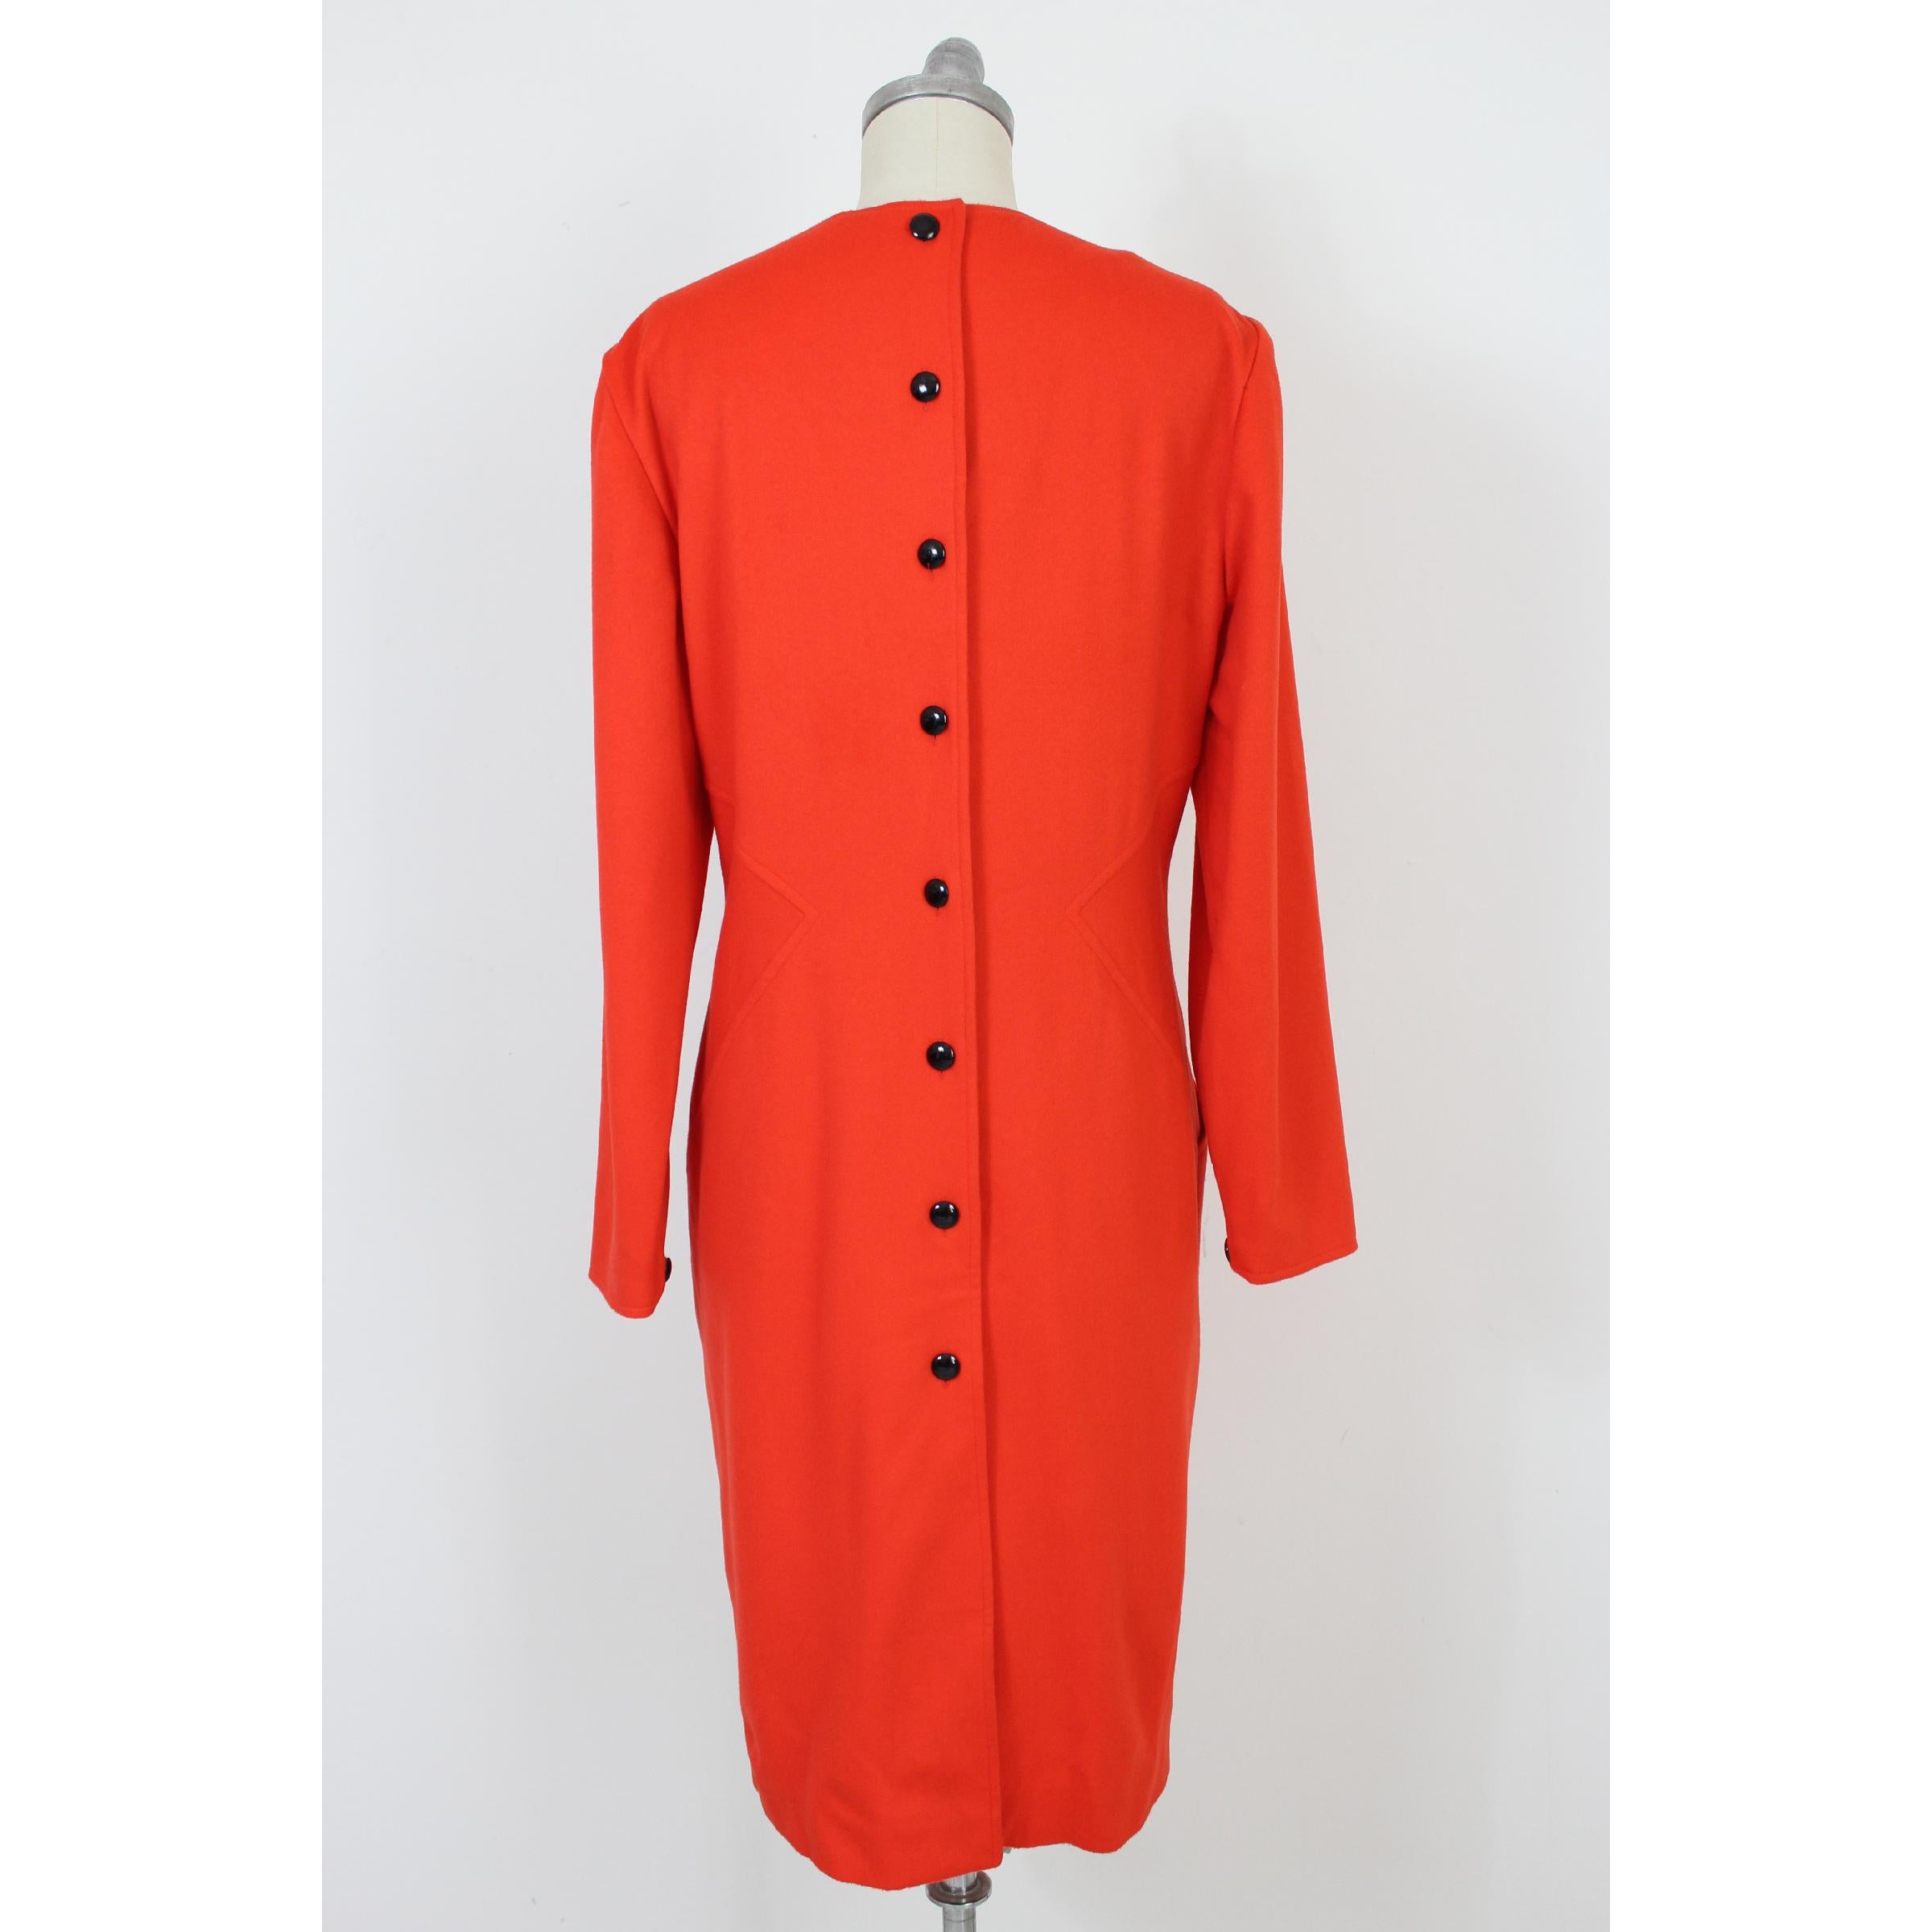 Vintage women's 70s dress Dani. Red long evening dress, 100% pure wool. Closing with black buttons over the entire length of the dress, V-neckline, pockets on the sides. Made in Italy. New with tag.

Size: 46 It 12 Us 14 Uk

Shoulder: 46